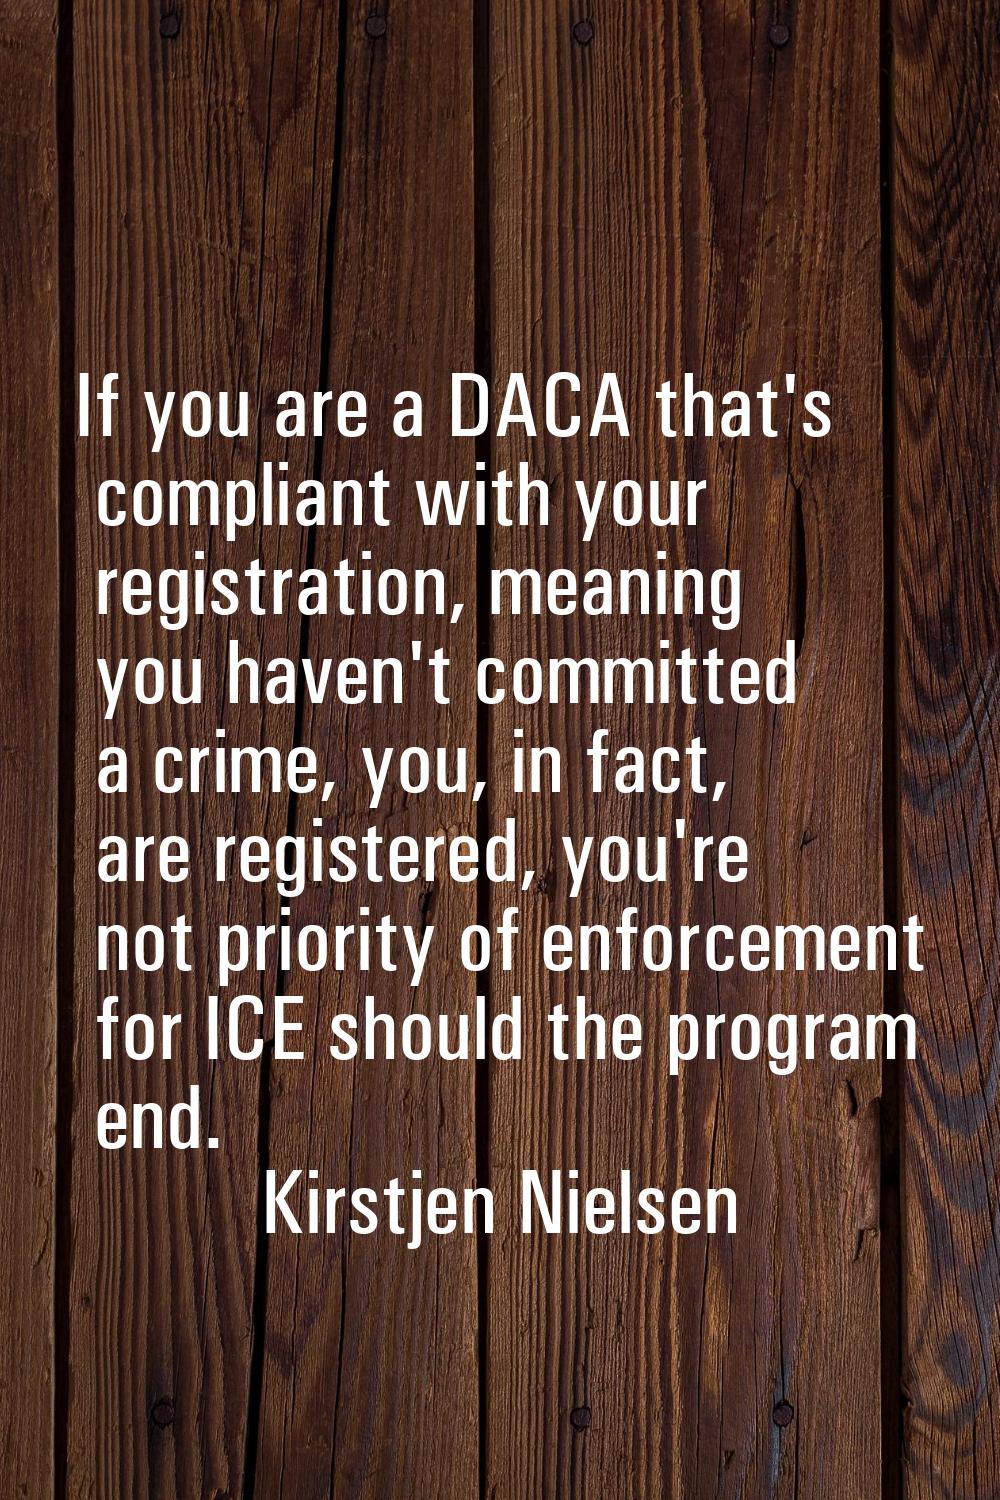 If you are a DACA that's compliant with your registration, meaning you haven't committed a crime, y